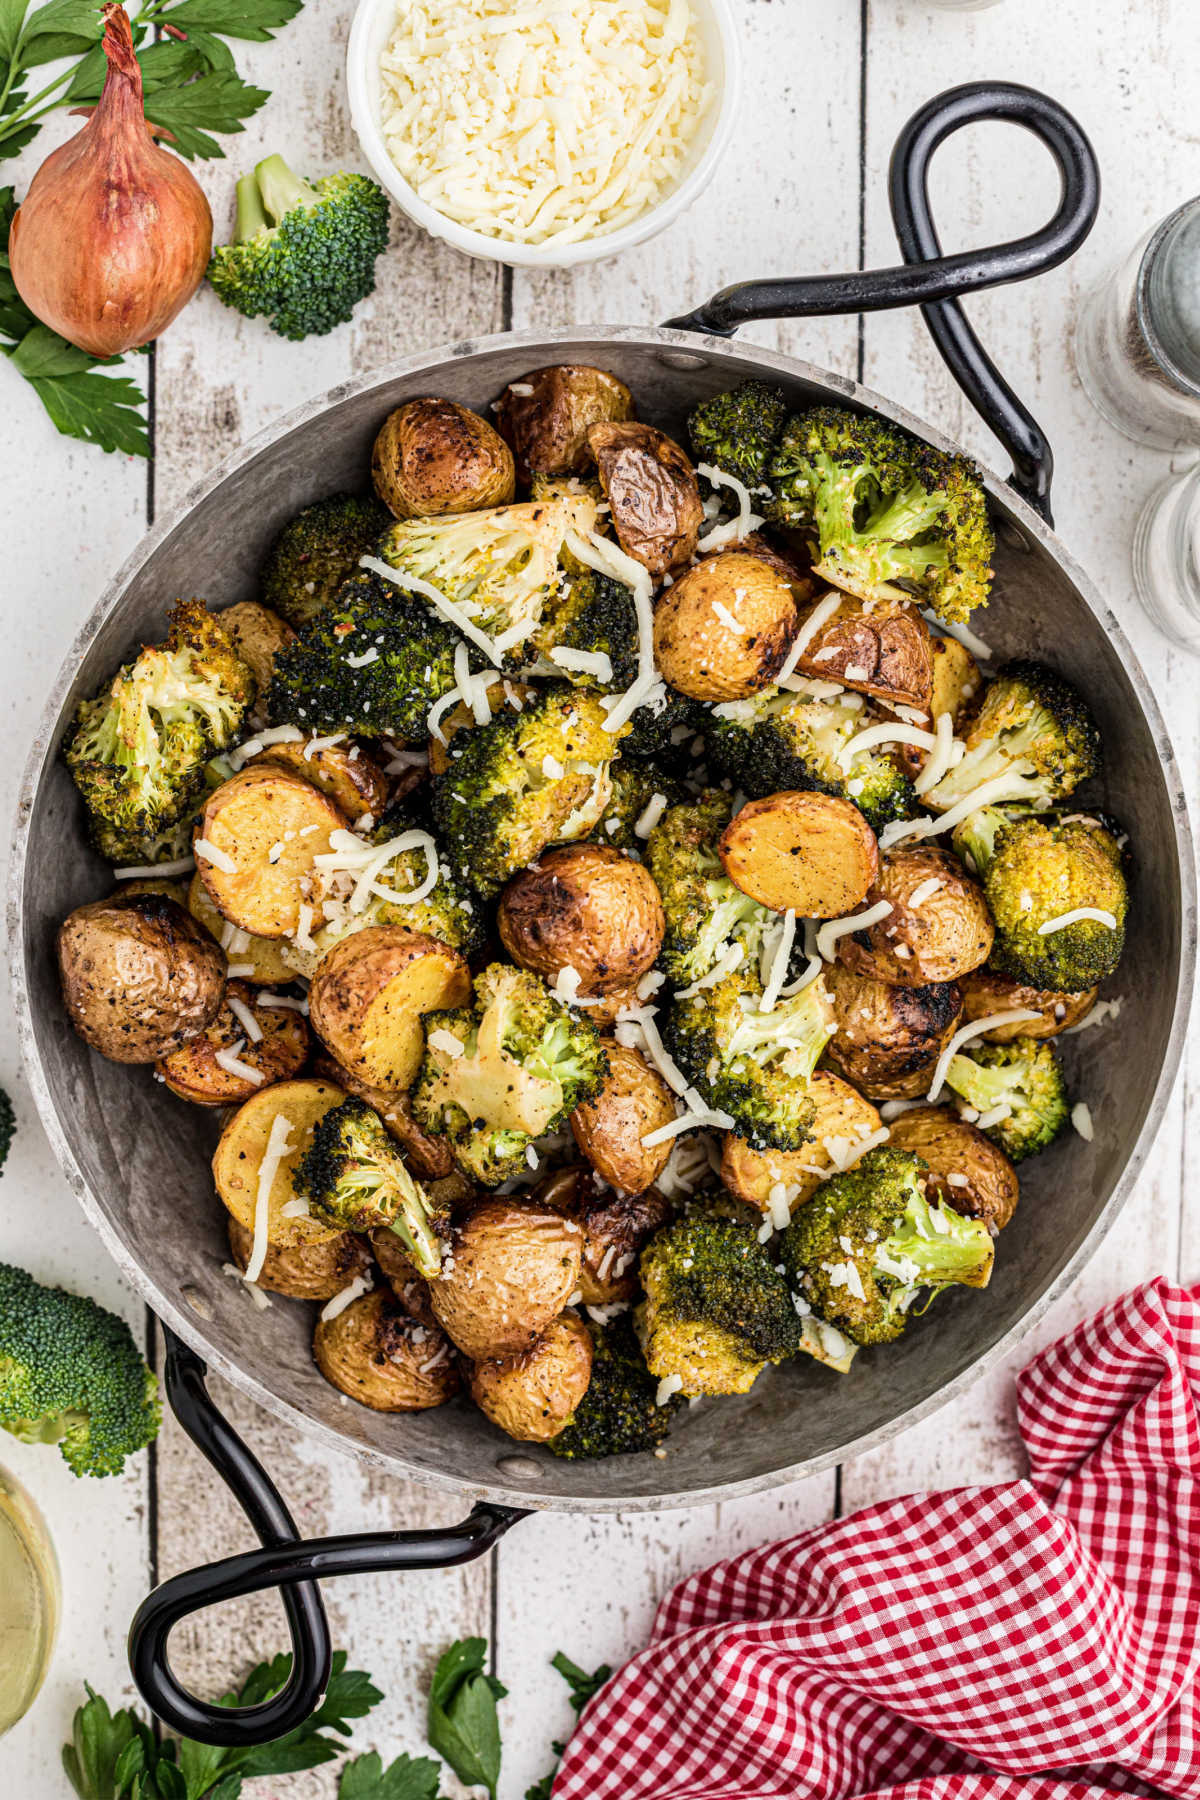 Overhead shot of a pan of roasted potatoes and broccoli.